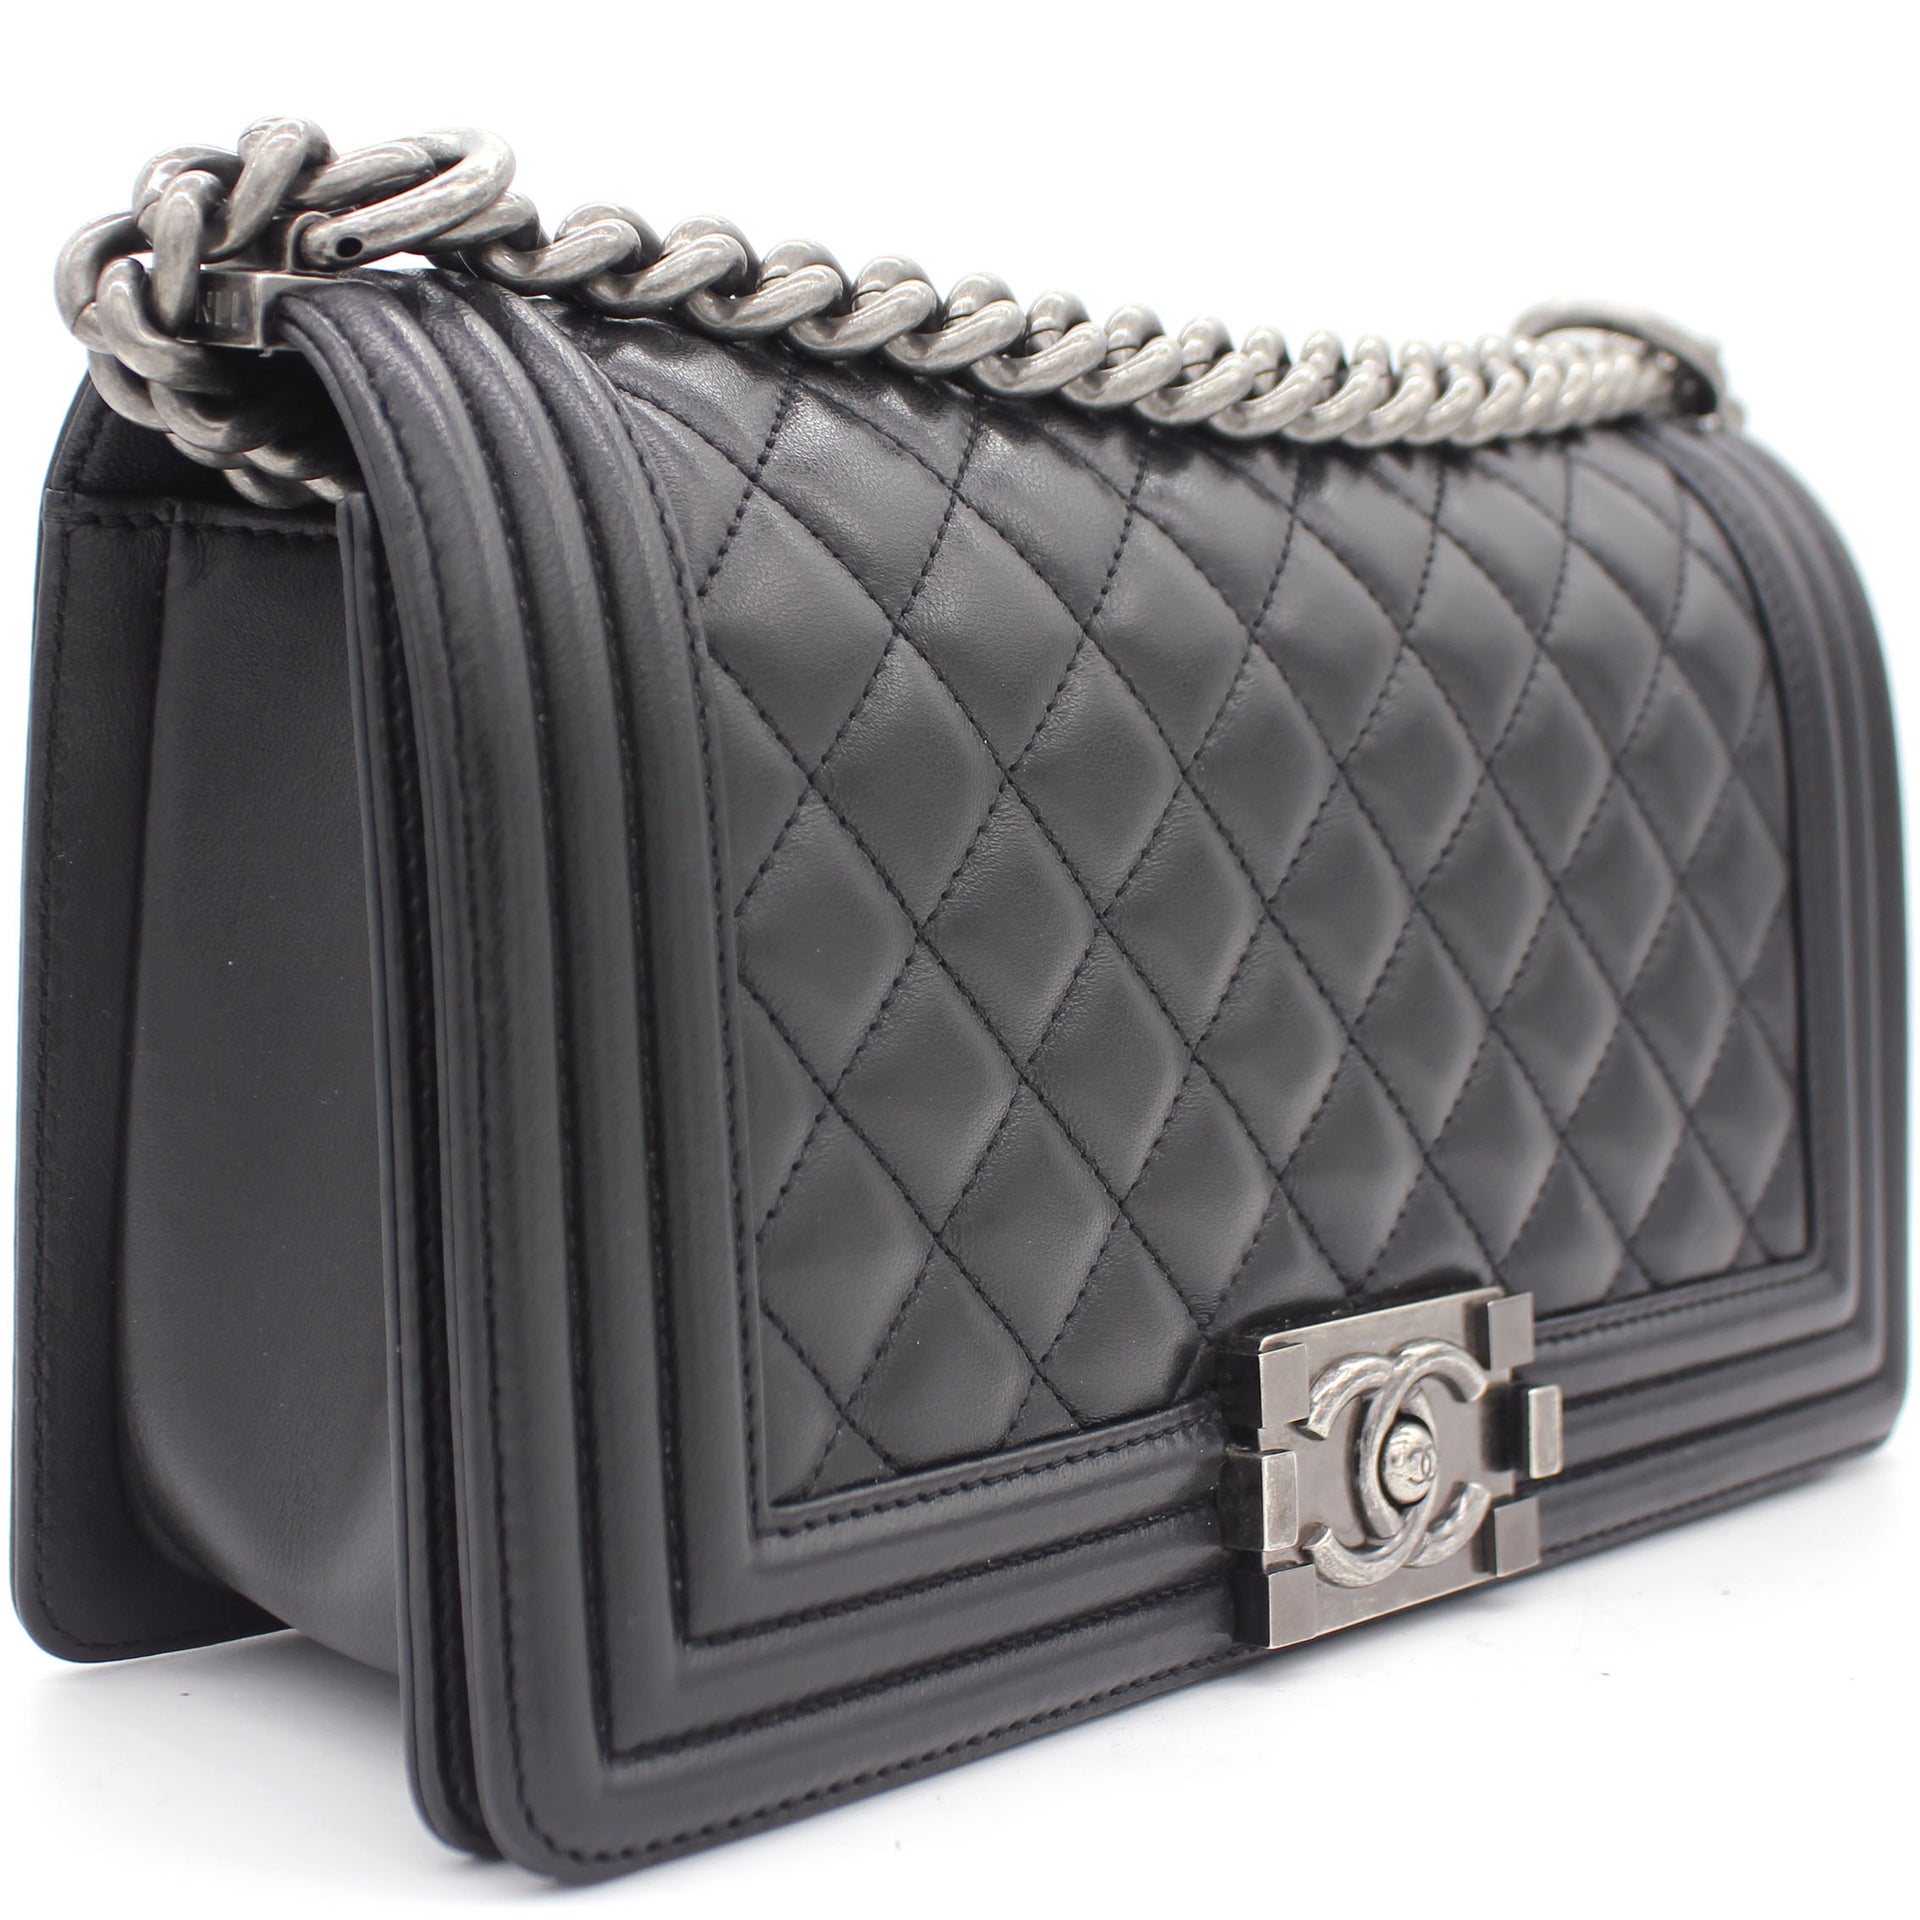 Chanel Black Quilted New Medium Boy Bag of Lambskin Leather with Antique  Gold Hardware  Handbags and Accessories Online  Ecommerce Retail   Sothebys